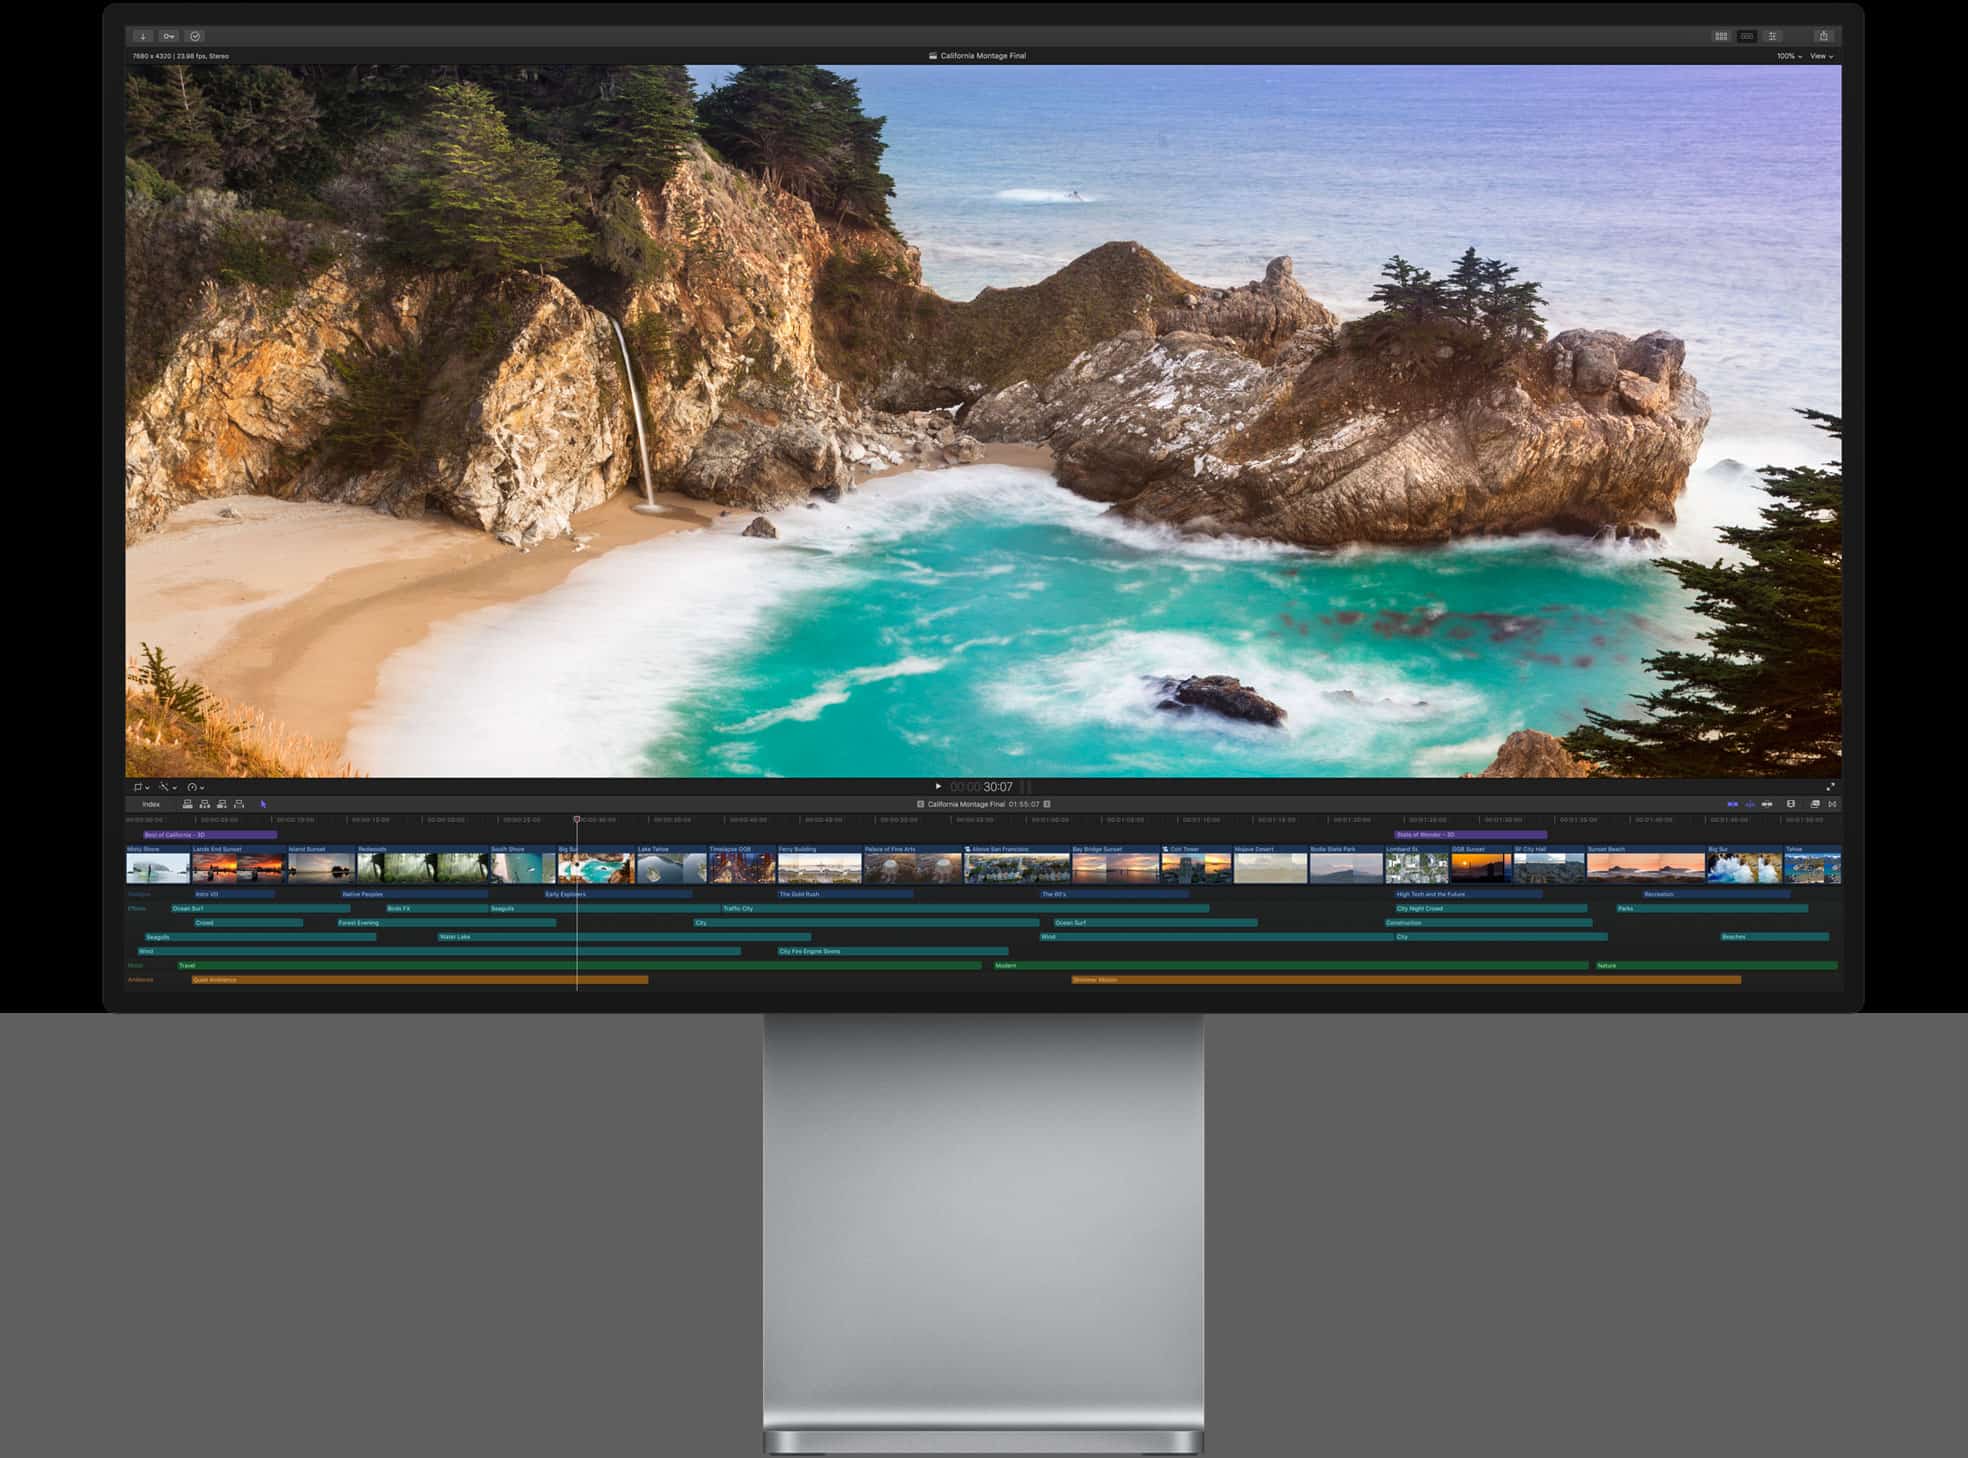 Apple Offering 90 Day Free Trials for Final Cut Pro X and Logic Pro X